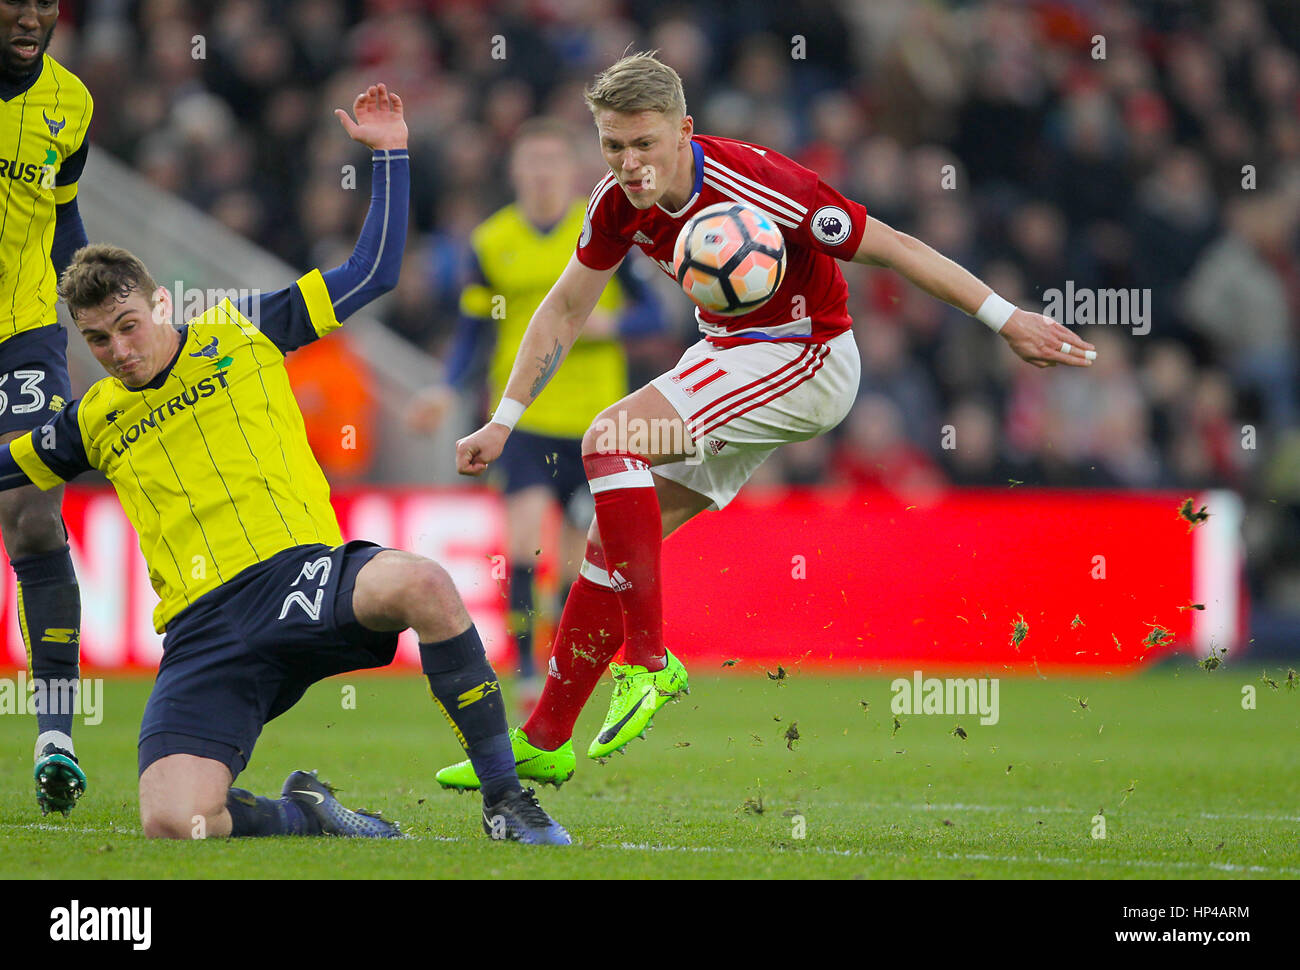 Oxford United's Ryan Ledson and Middlesbrough's Viktor Fischer battle for the ball during the Emirates FA Cup, Fifth Round match at the Riverside Stadium, Middlesbrough. PRESS ASSOCIATION Photo. Picture date: Saturday February 18, 2017. See PA story SOCCER Middlesbrough. Photo credit should read: Richard Sellers/PA Wire. RESTRICTIONS: No use with unauthorised audio, video, data, fixture lists, club/league logos or 'live' services. Online in-match use limited to 75 images, no video emulation. No use in betting, games or single club/league/player publications. Stock Photo